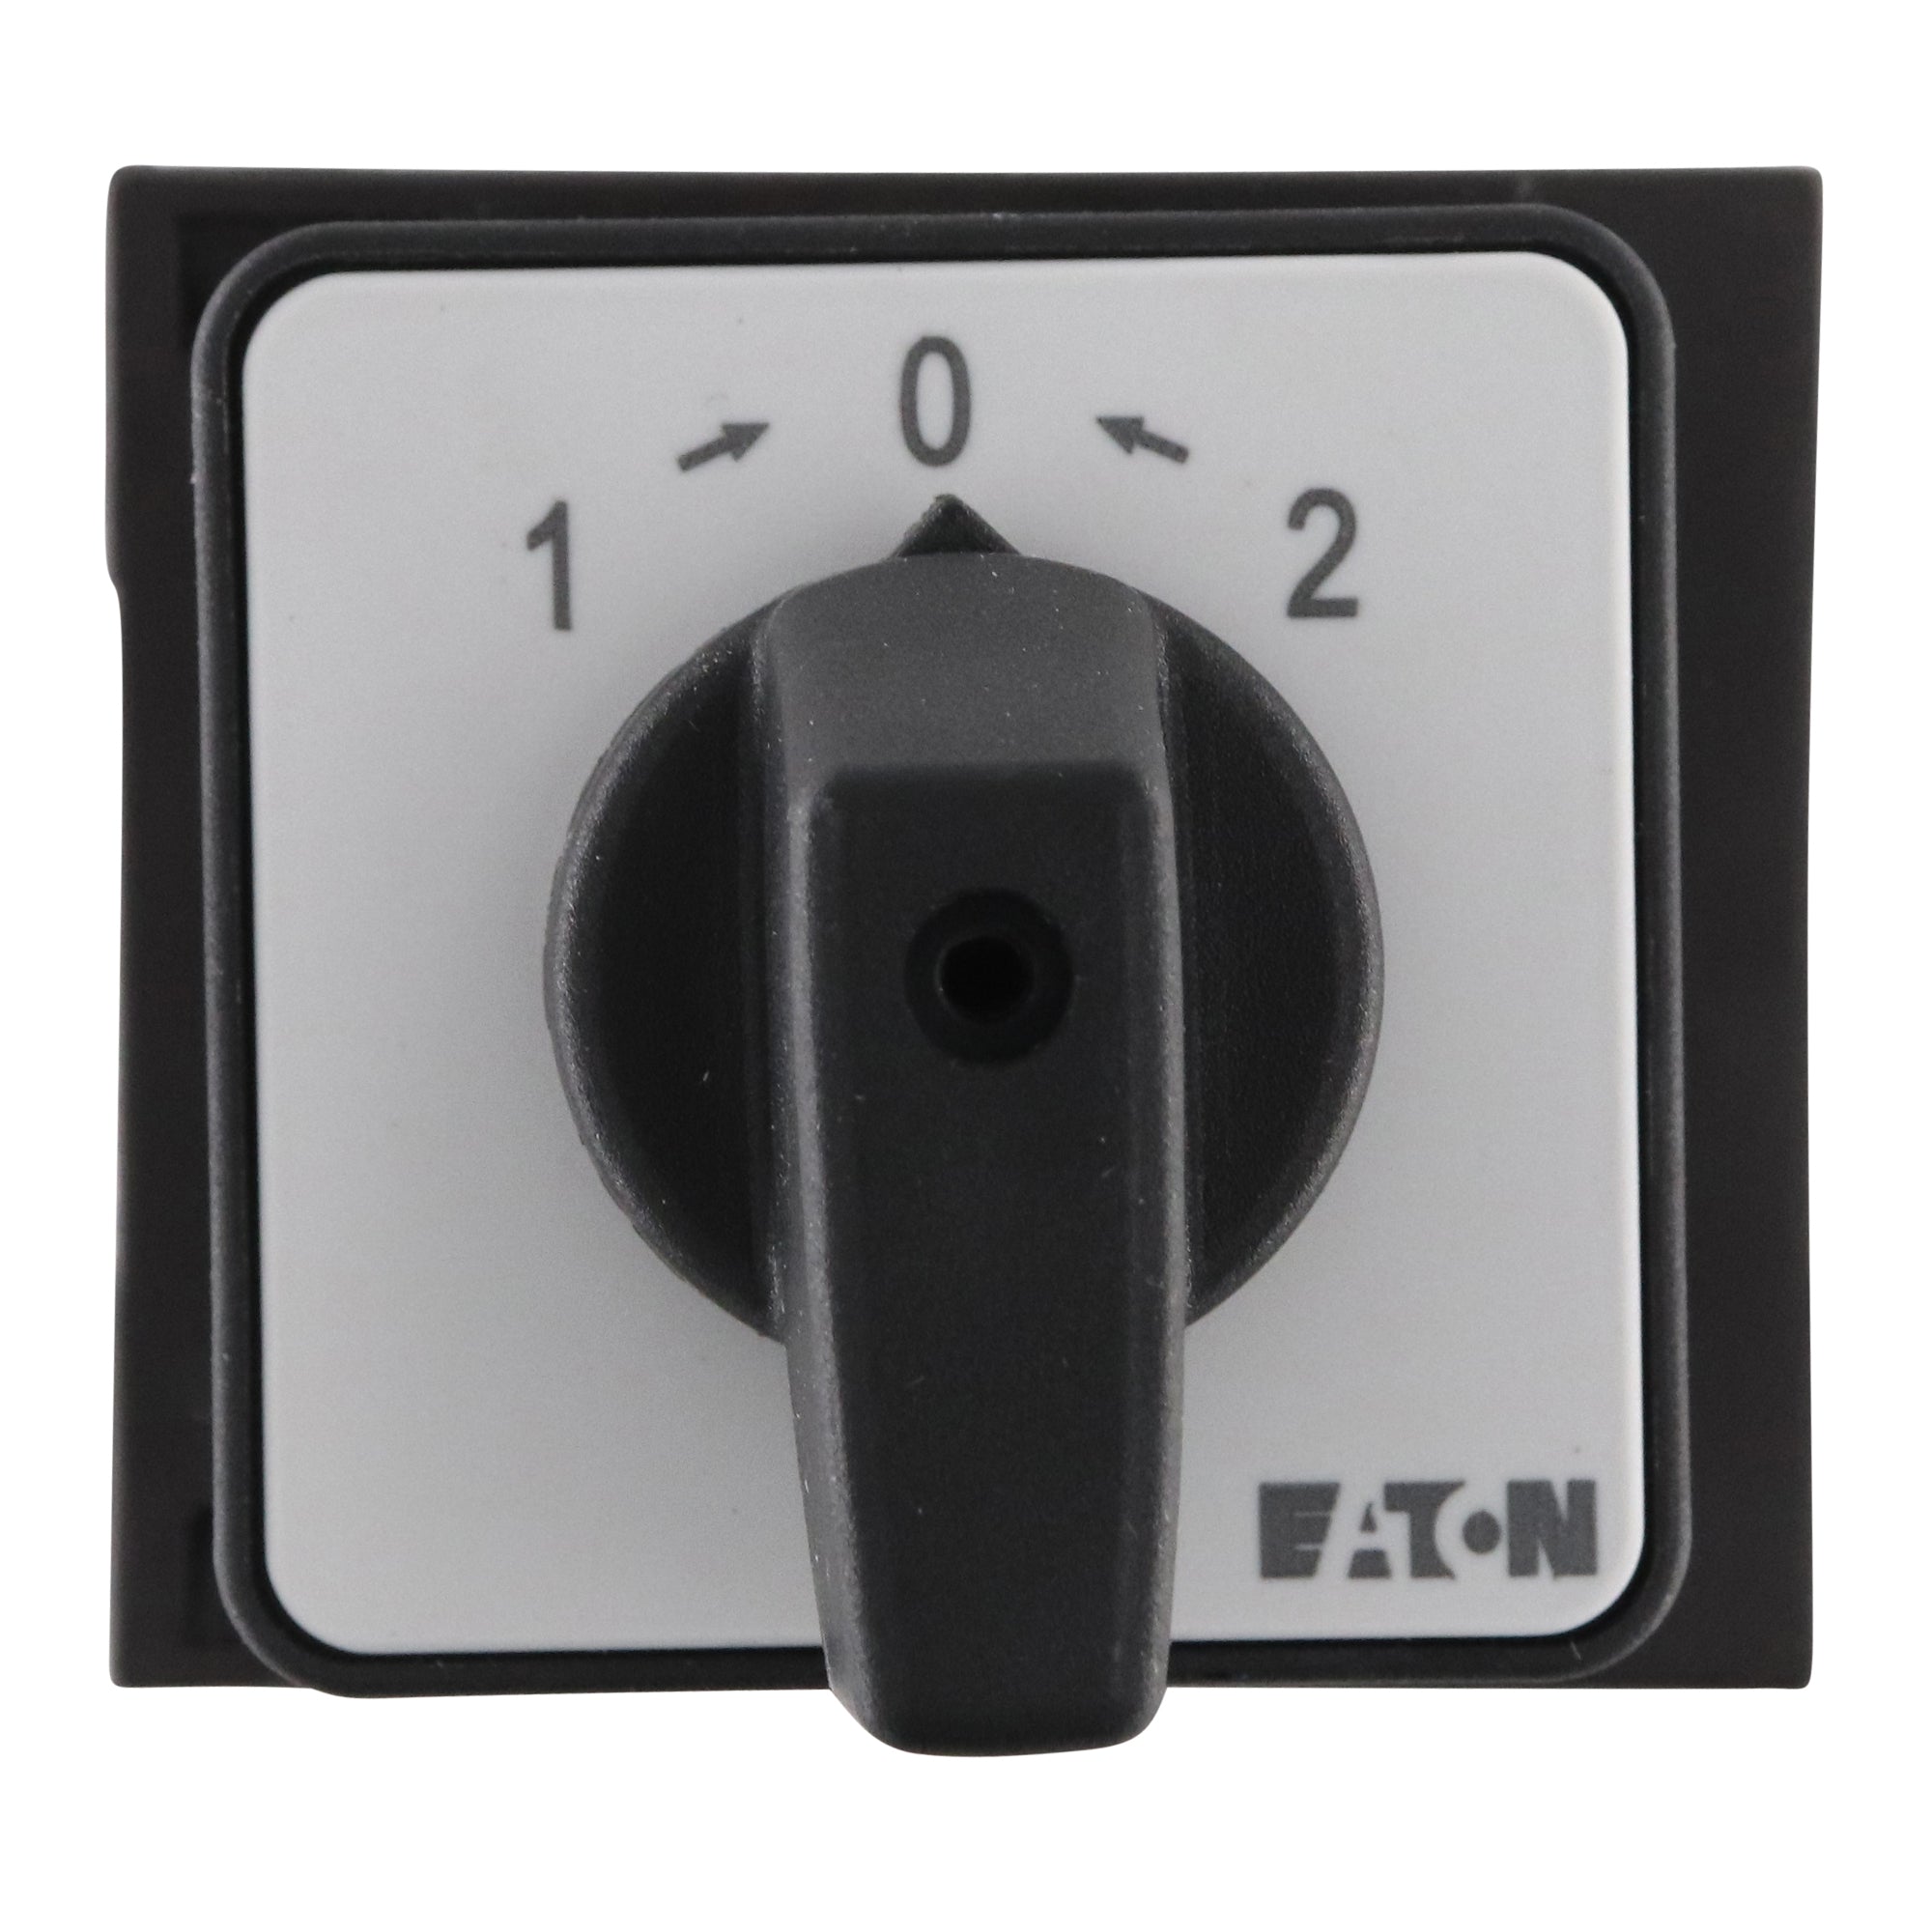 EATON, EATON T3-2-8215/E CHANGE OVER SWITCH WITH OFF POSITION, 25A, 600V-VOLT, GRAY